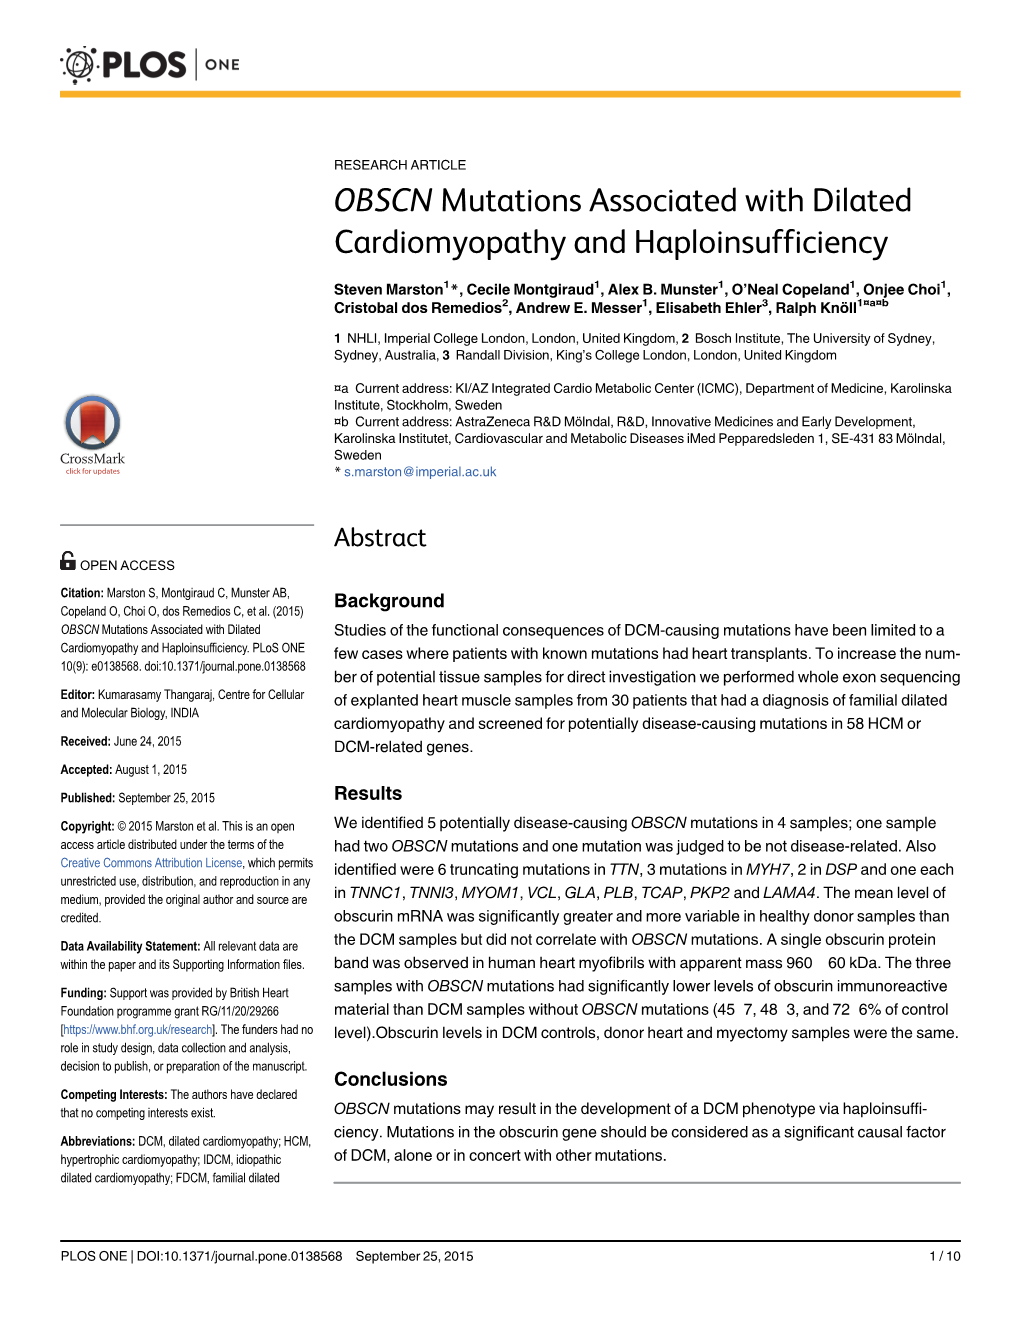 OBSCN Mutations Associated with Dilated Cardiomyopathy and Haploinsufficiency